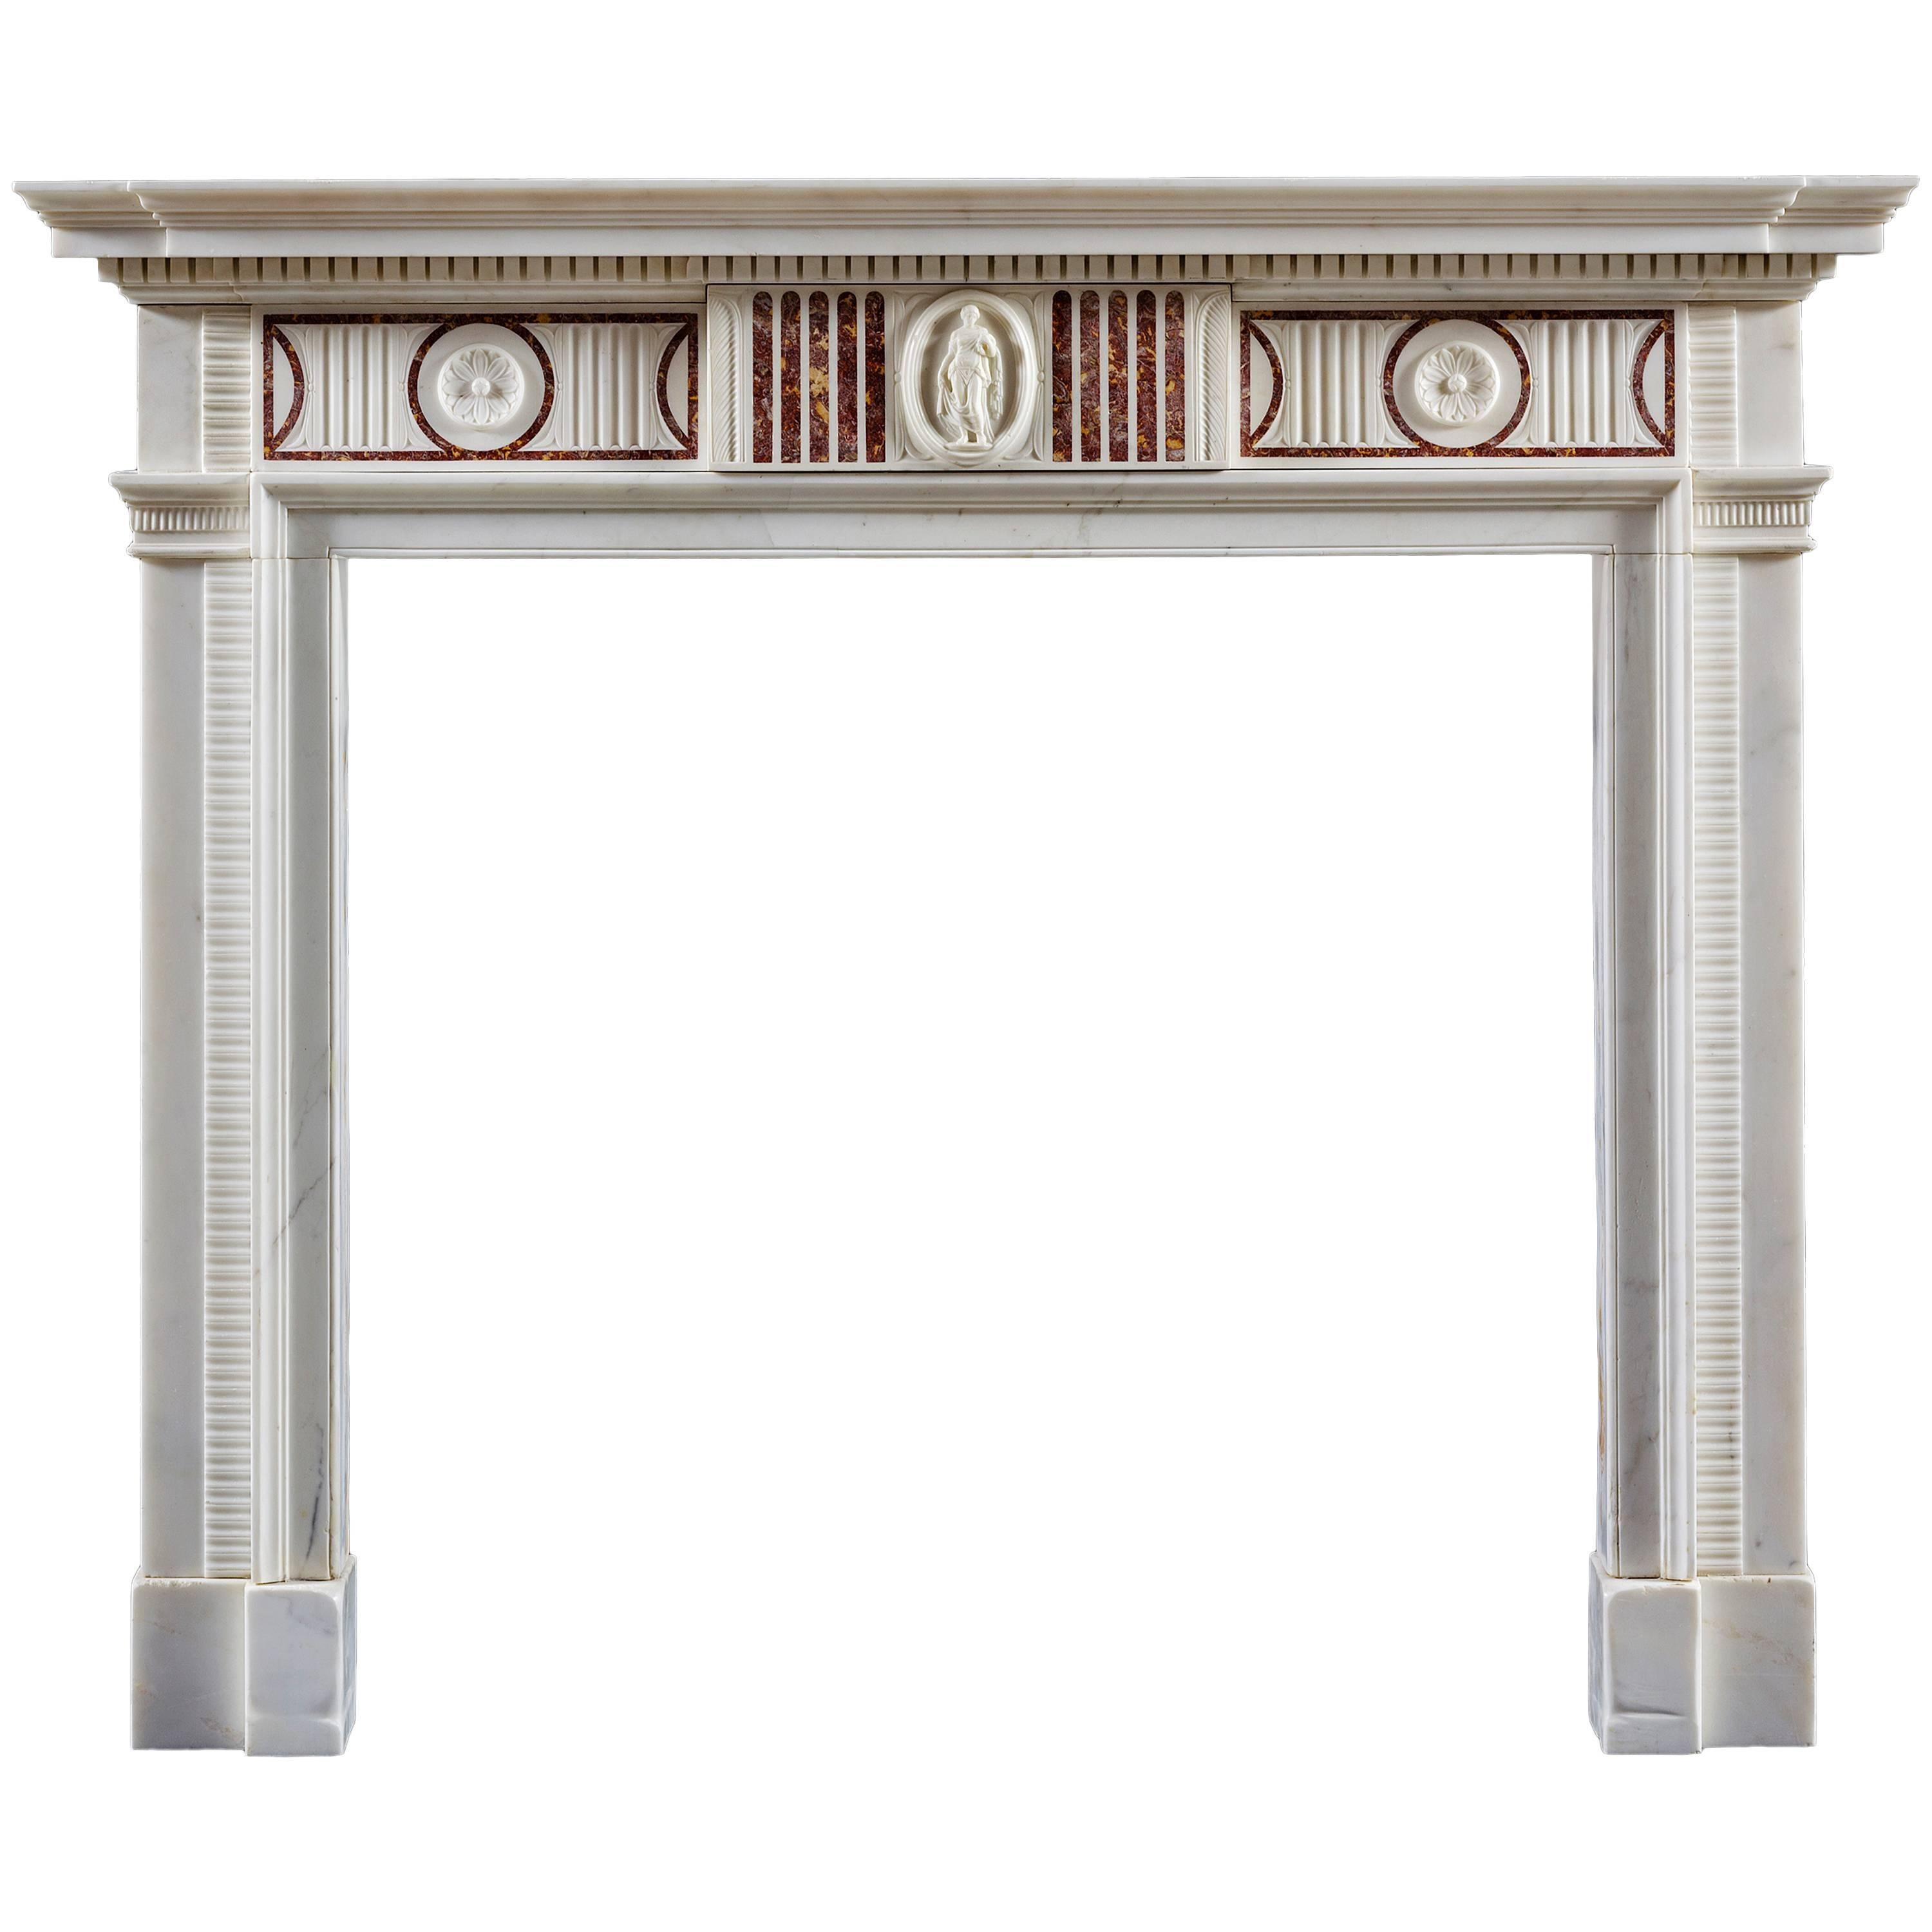 Antique Neoclassical Fireplace Mantel